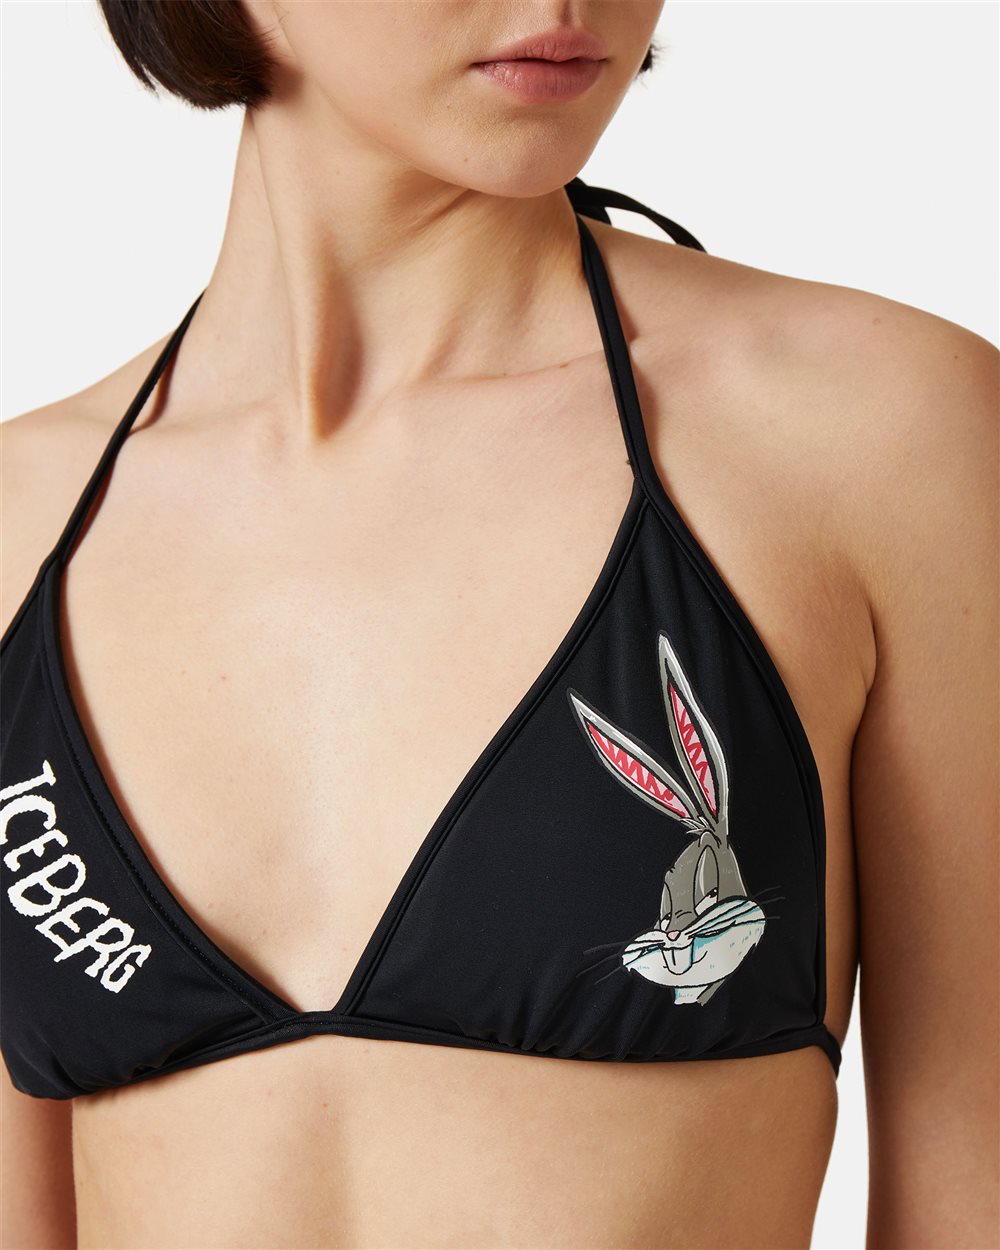 Swim top with logo and cartoon graphics - Iceberg - Official Website